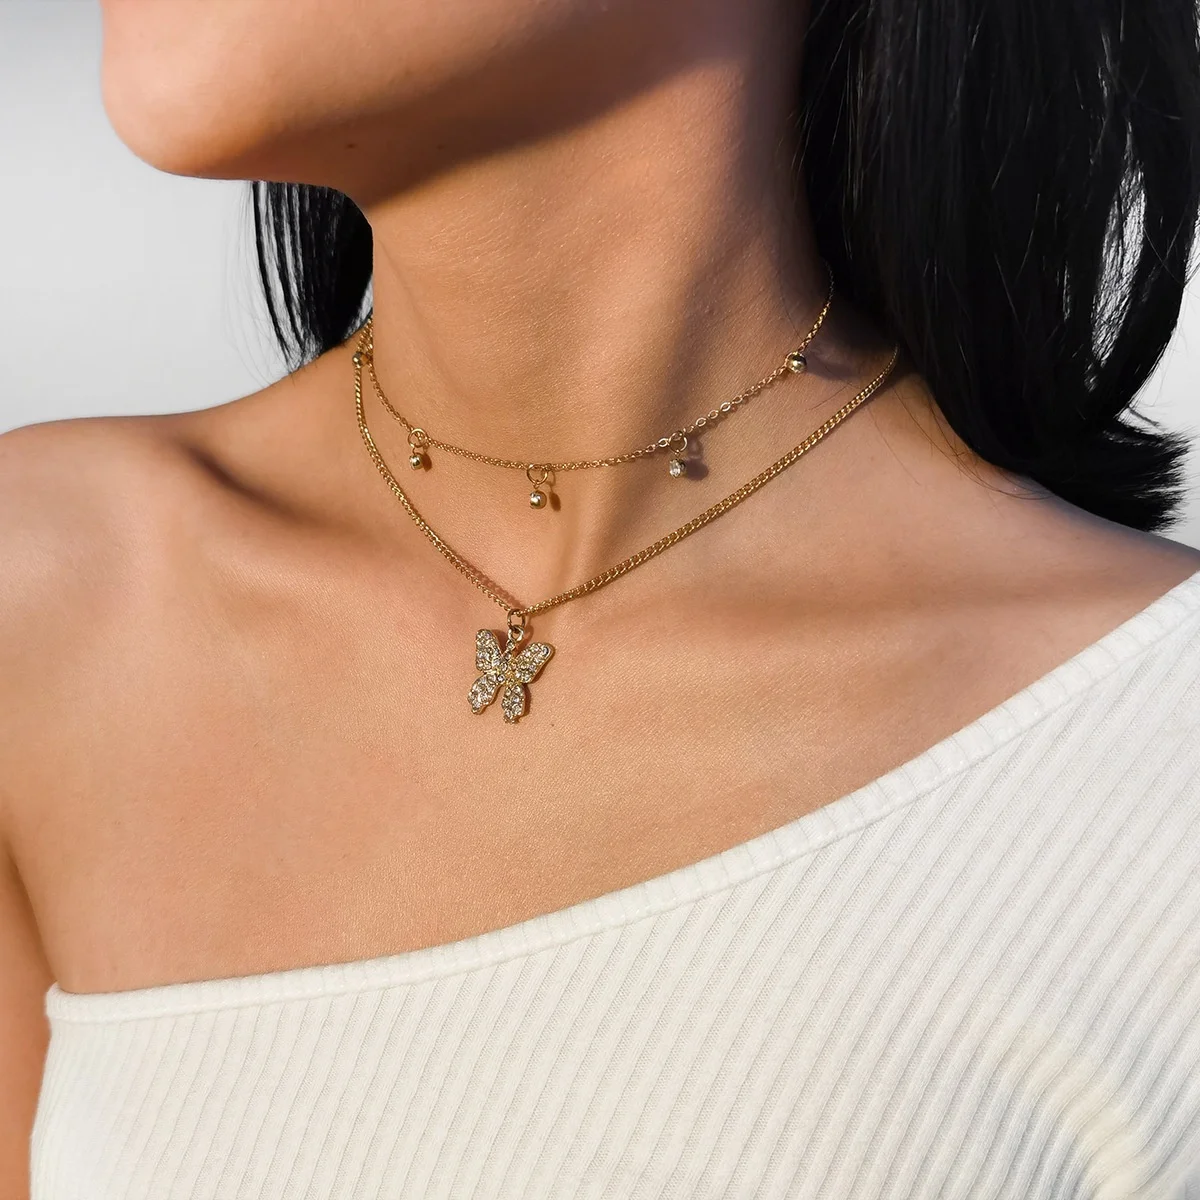 Download Shihan Hollow Butterfly Openwork Pendant Necklace Multi Layered Gold Choker Necklace Buy Butterfly Pendant Necklace Gold Butterfly Necklace Gold Choker Necklace Product On Alibaba Com